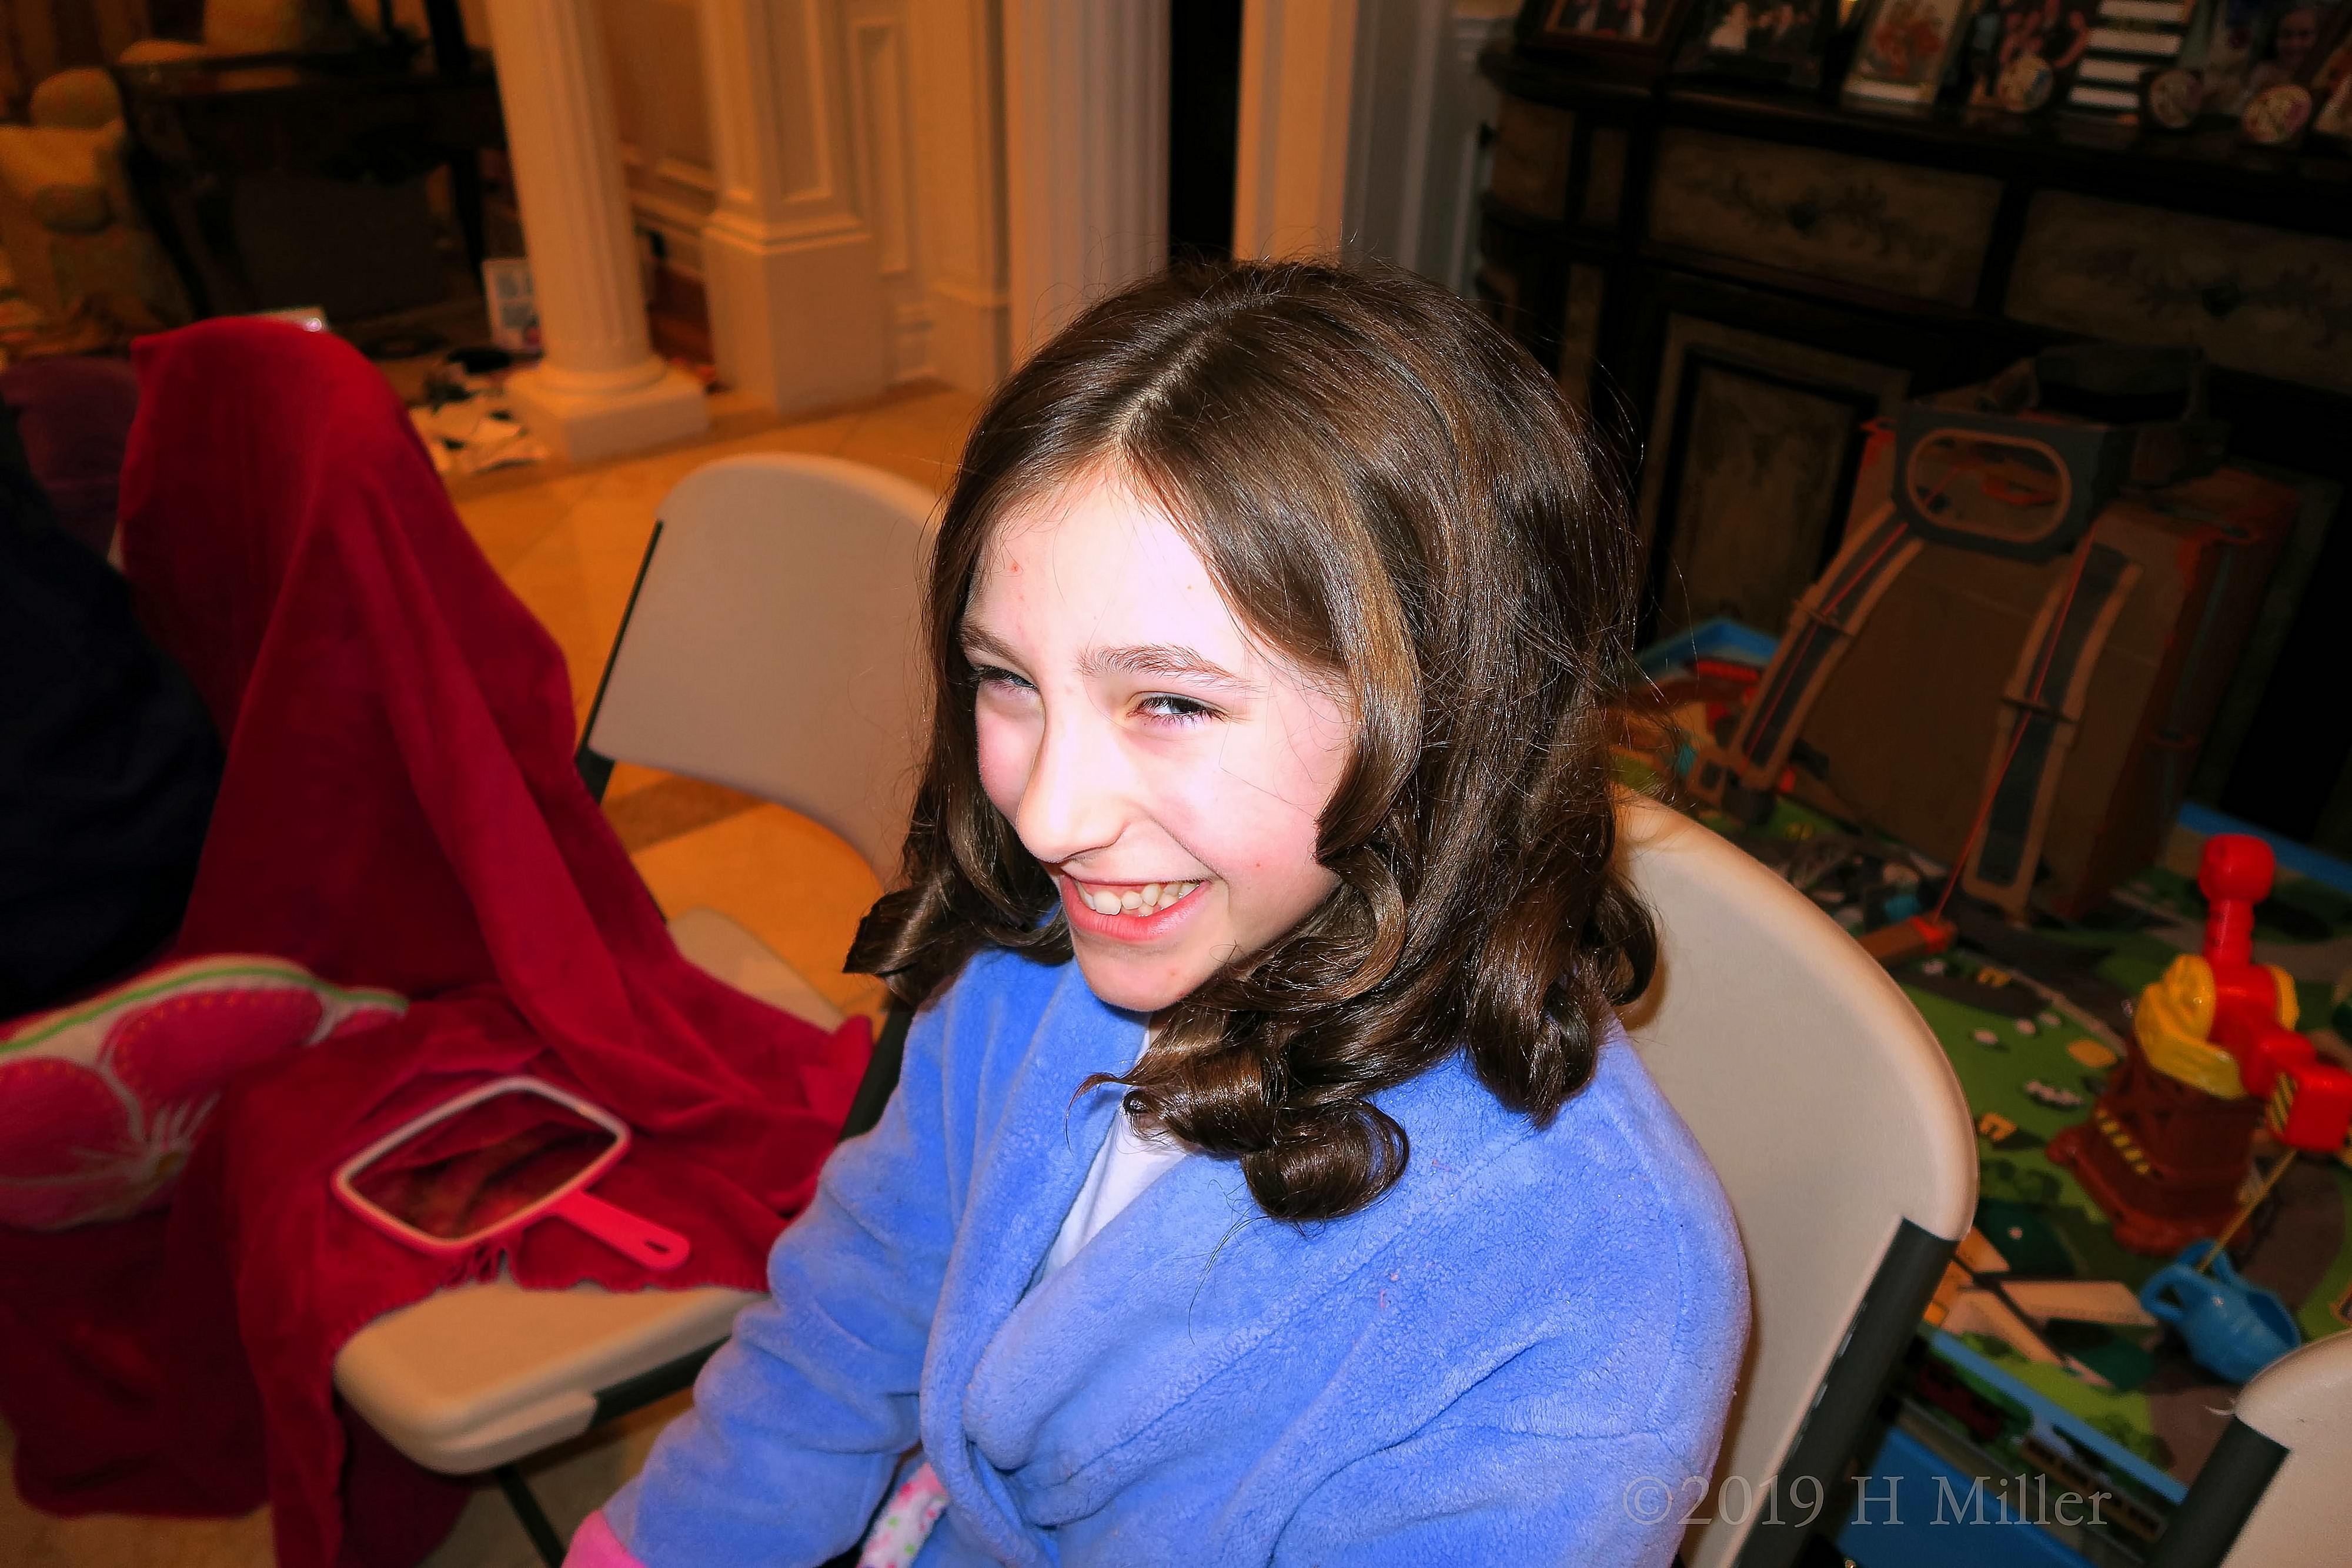 Smiles And Smiles! Kids Hairstyles At The Girls Spa!